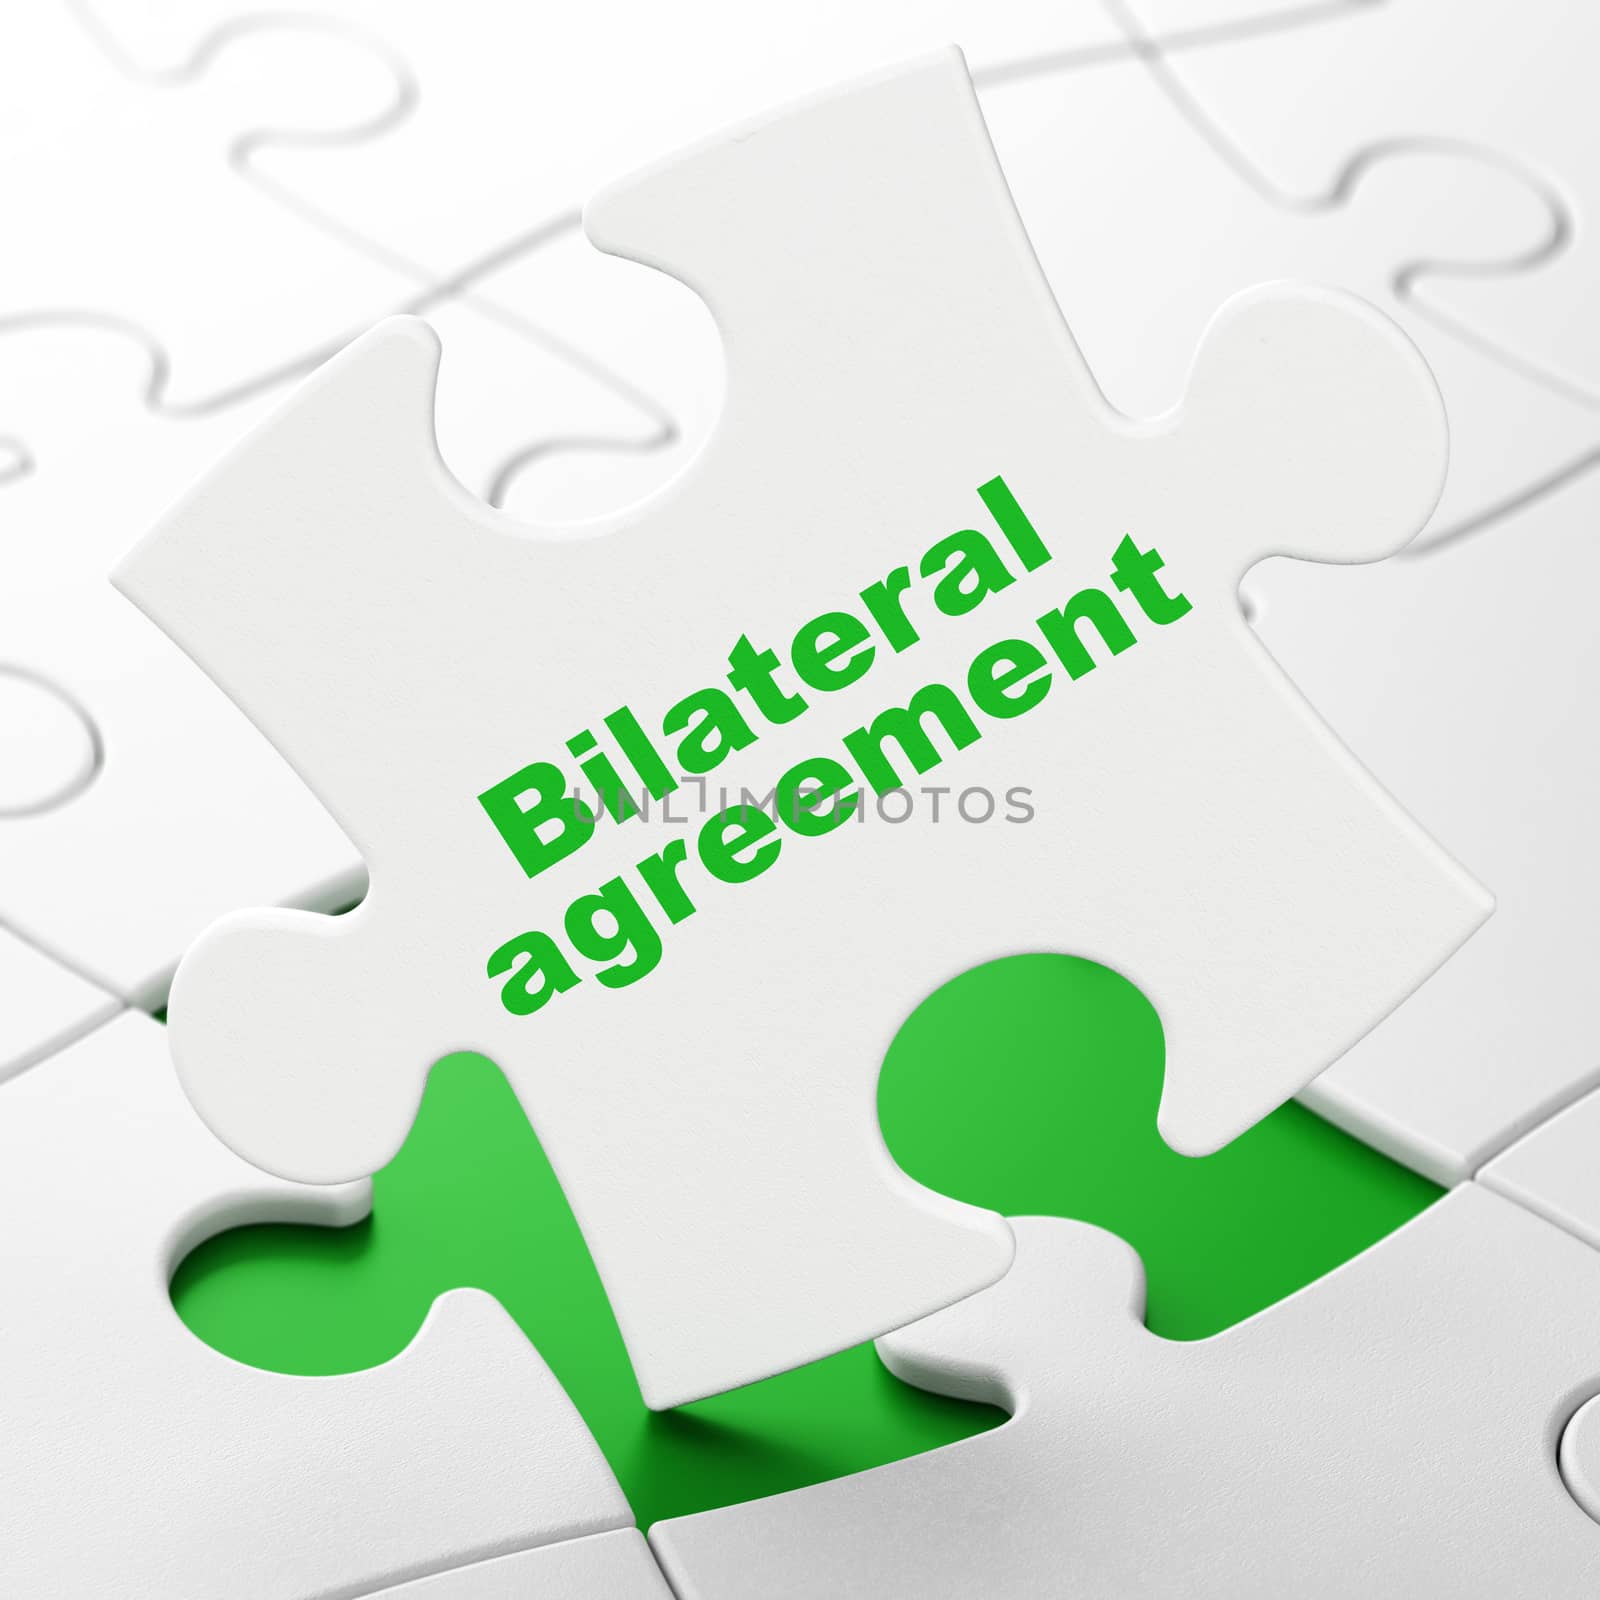 Insurance concept: Bilateral Agreement on White puzzle pieces background, 3D rendering